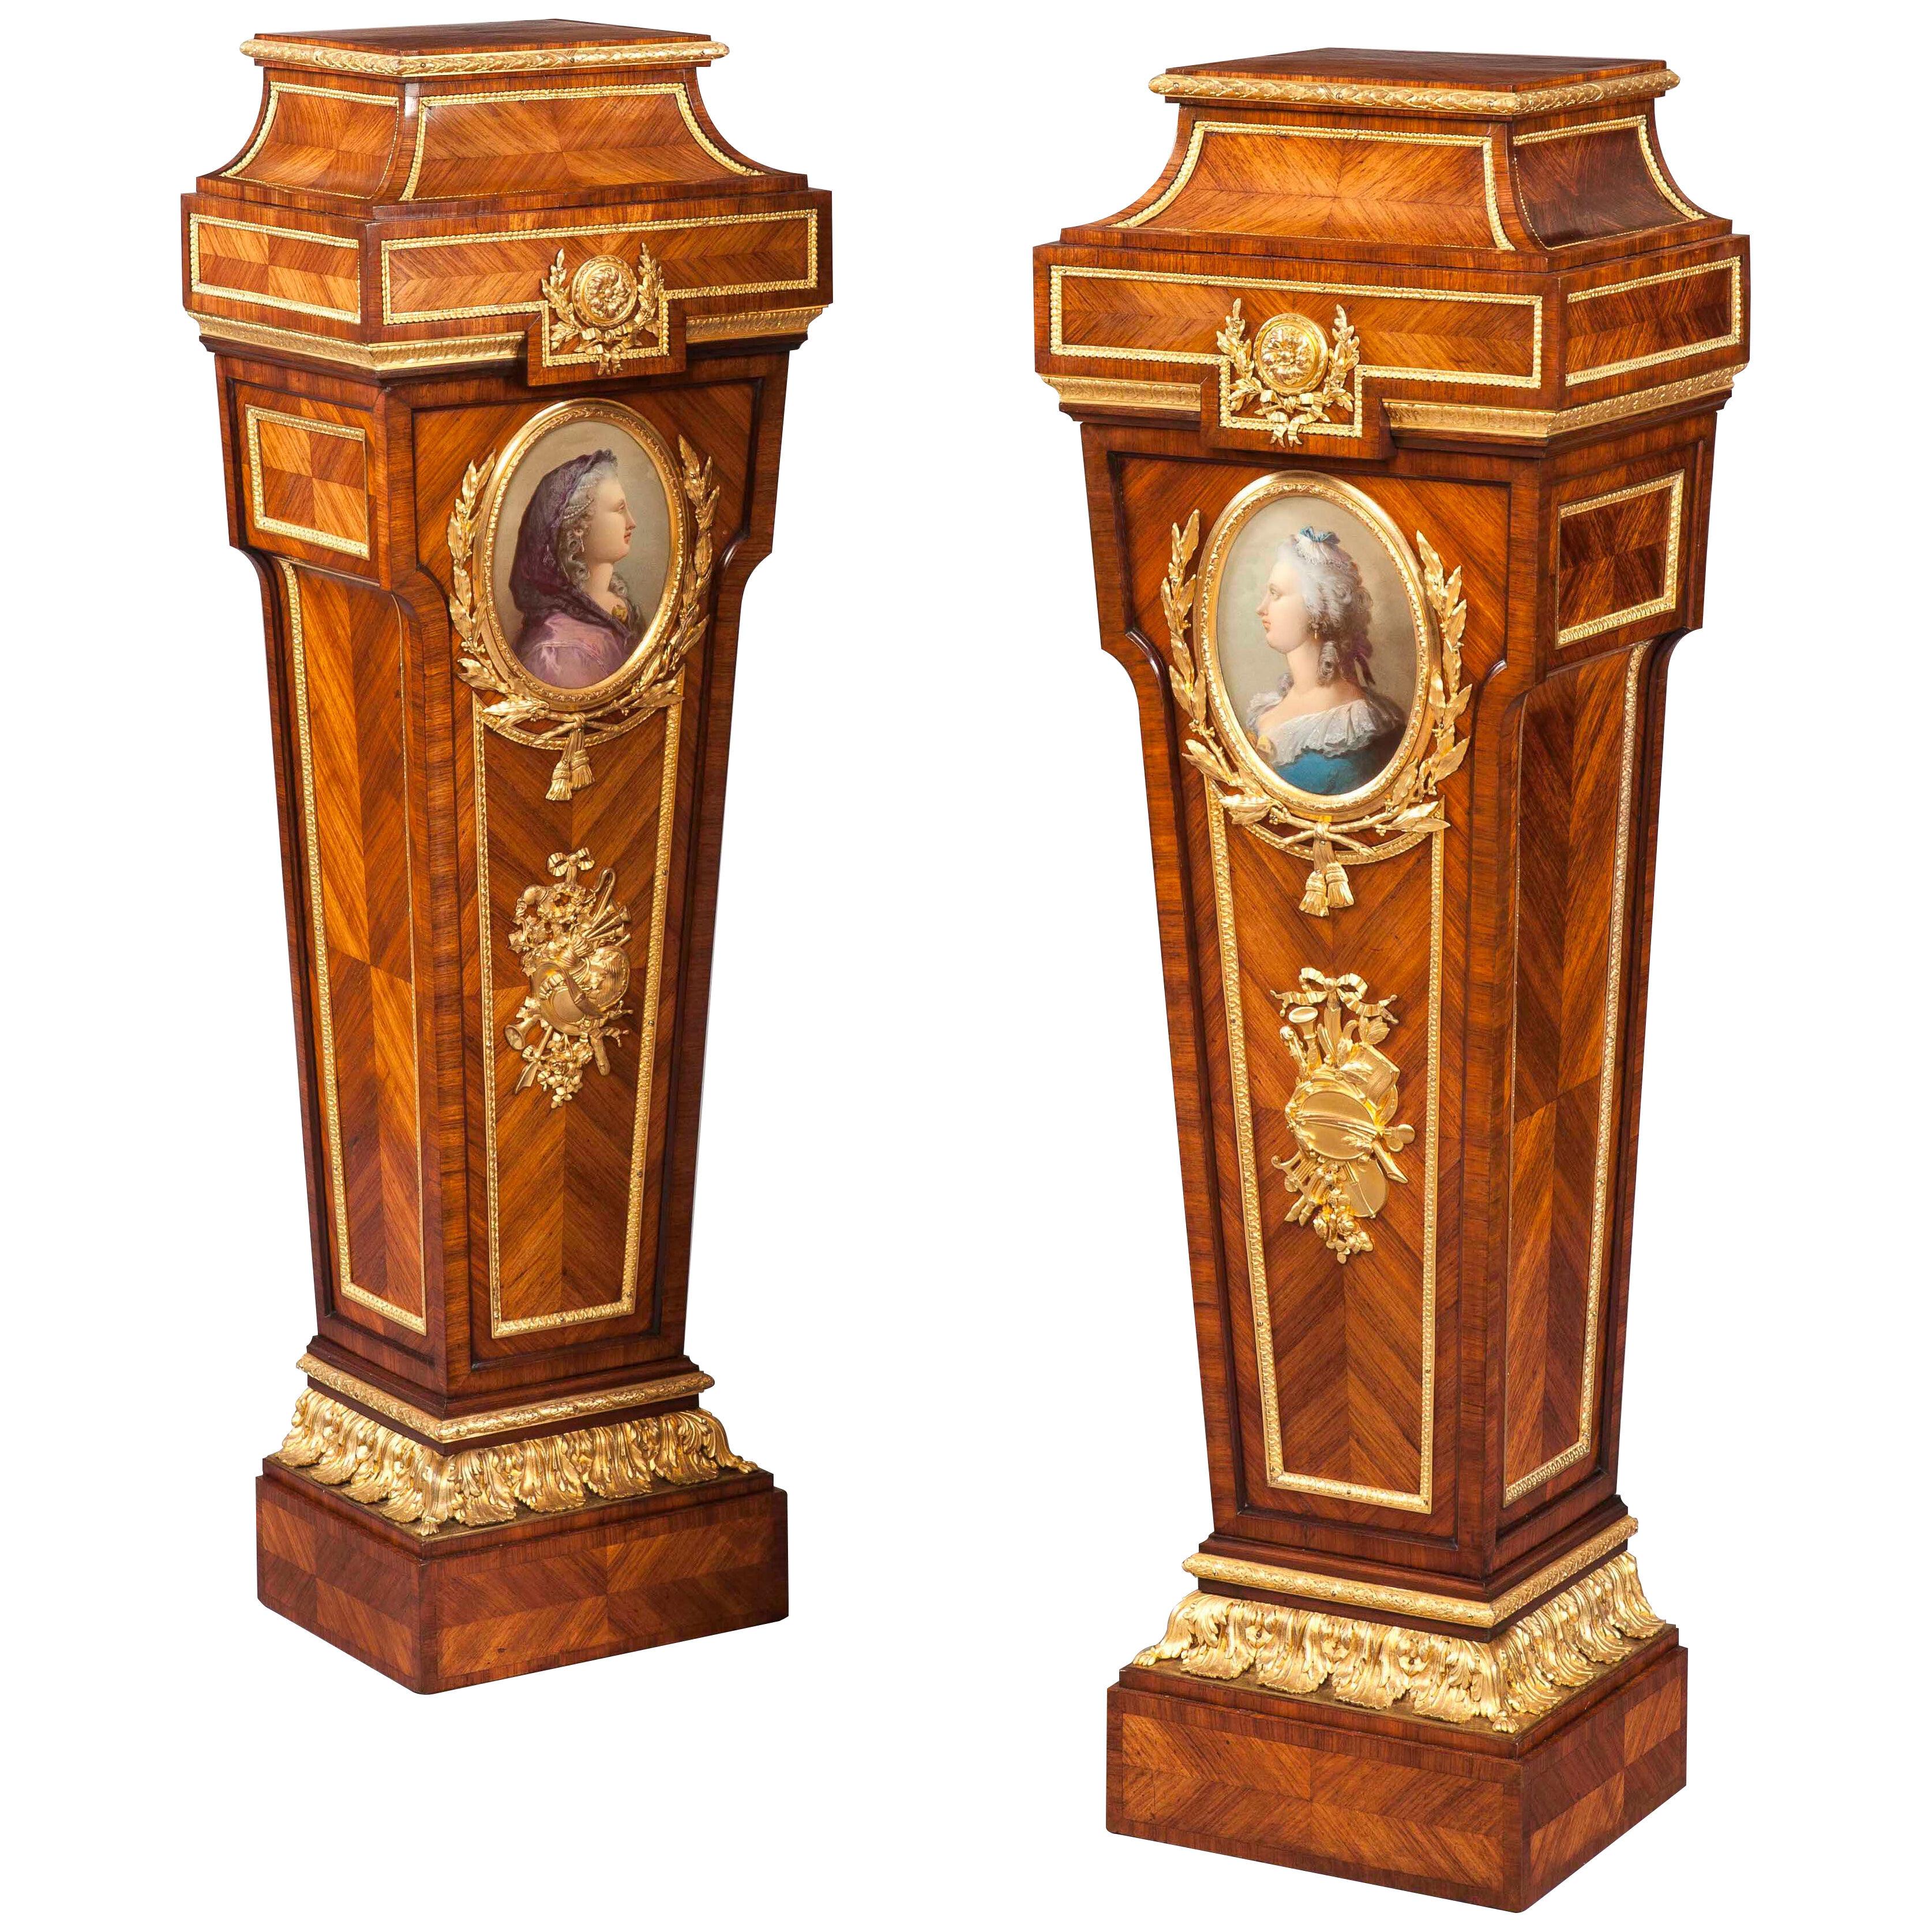 19th Century Pair of Pedestals in the Louis XVI Style